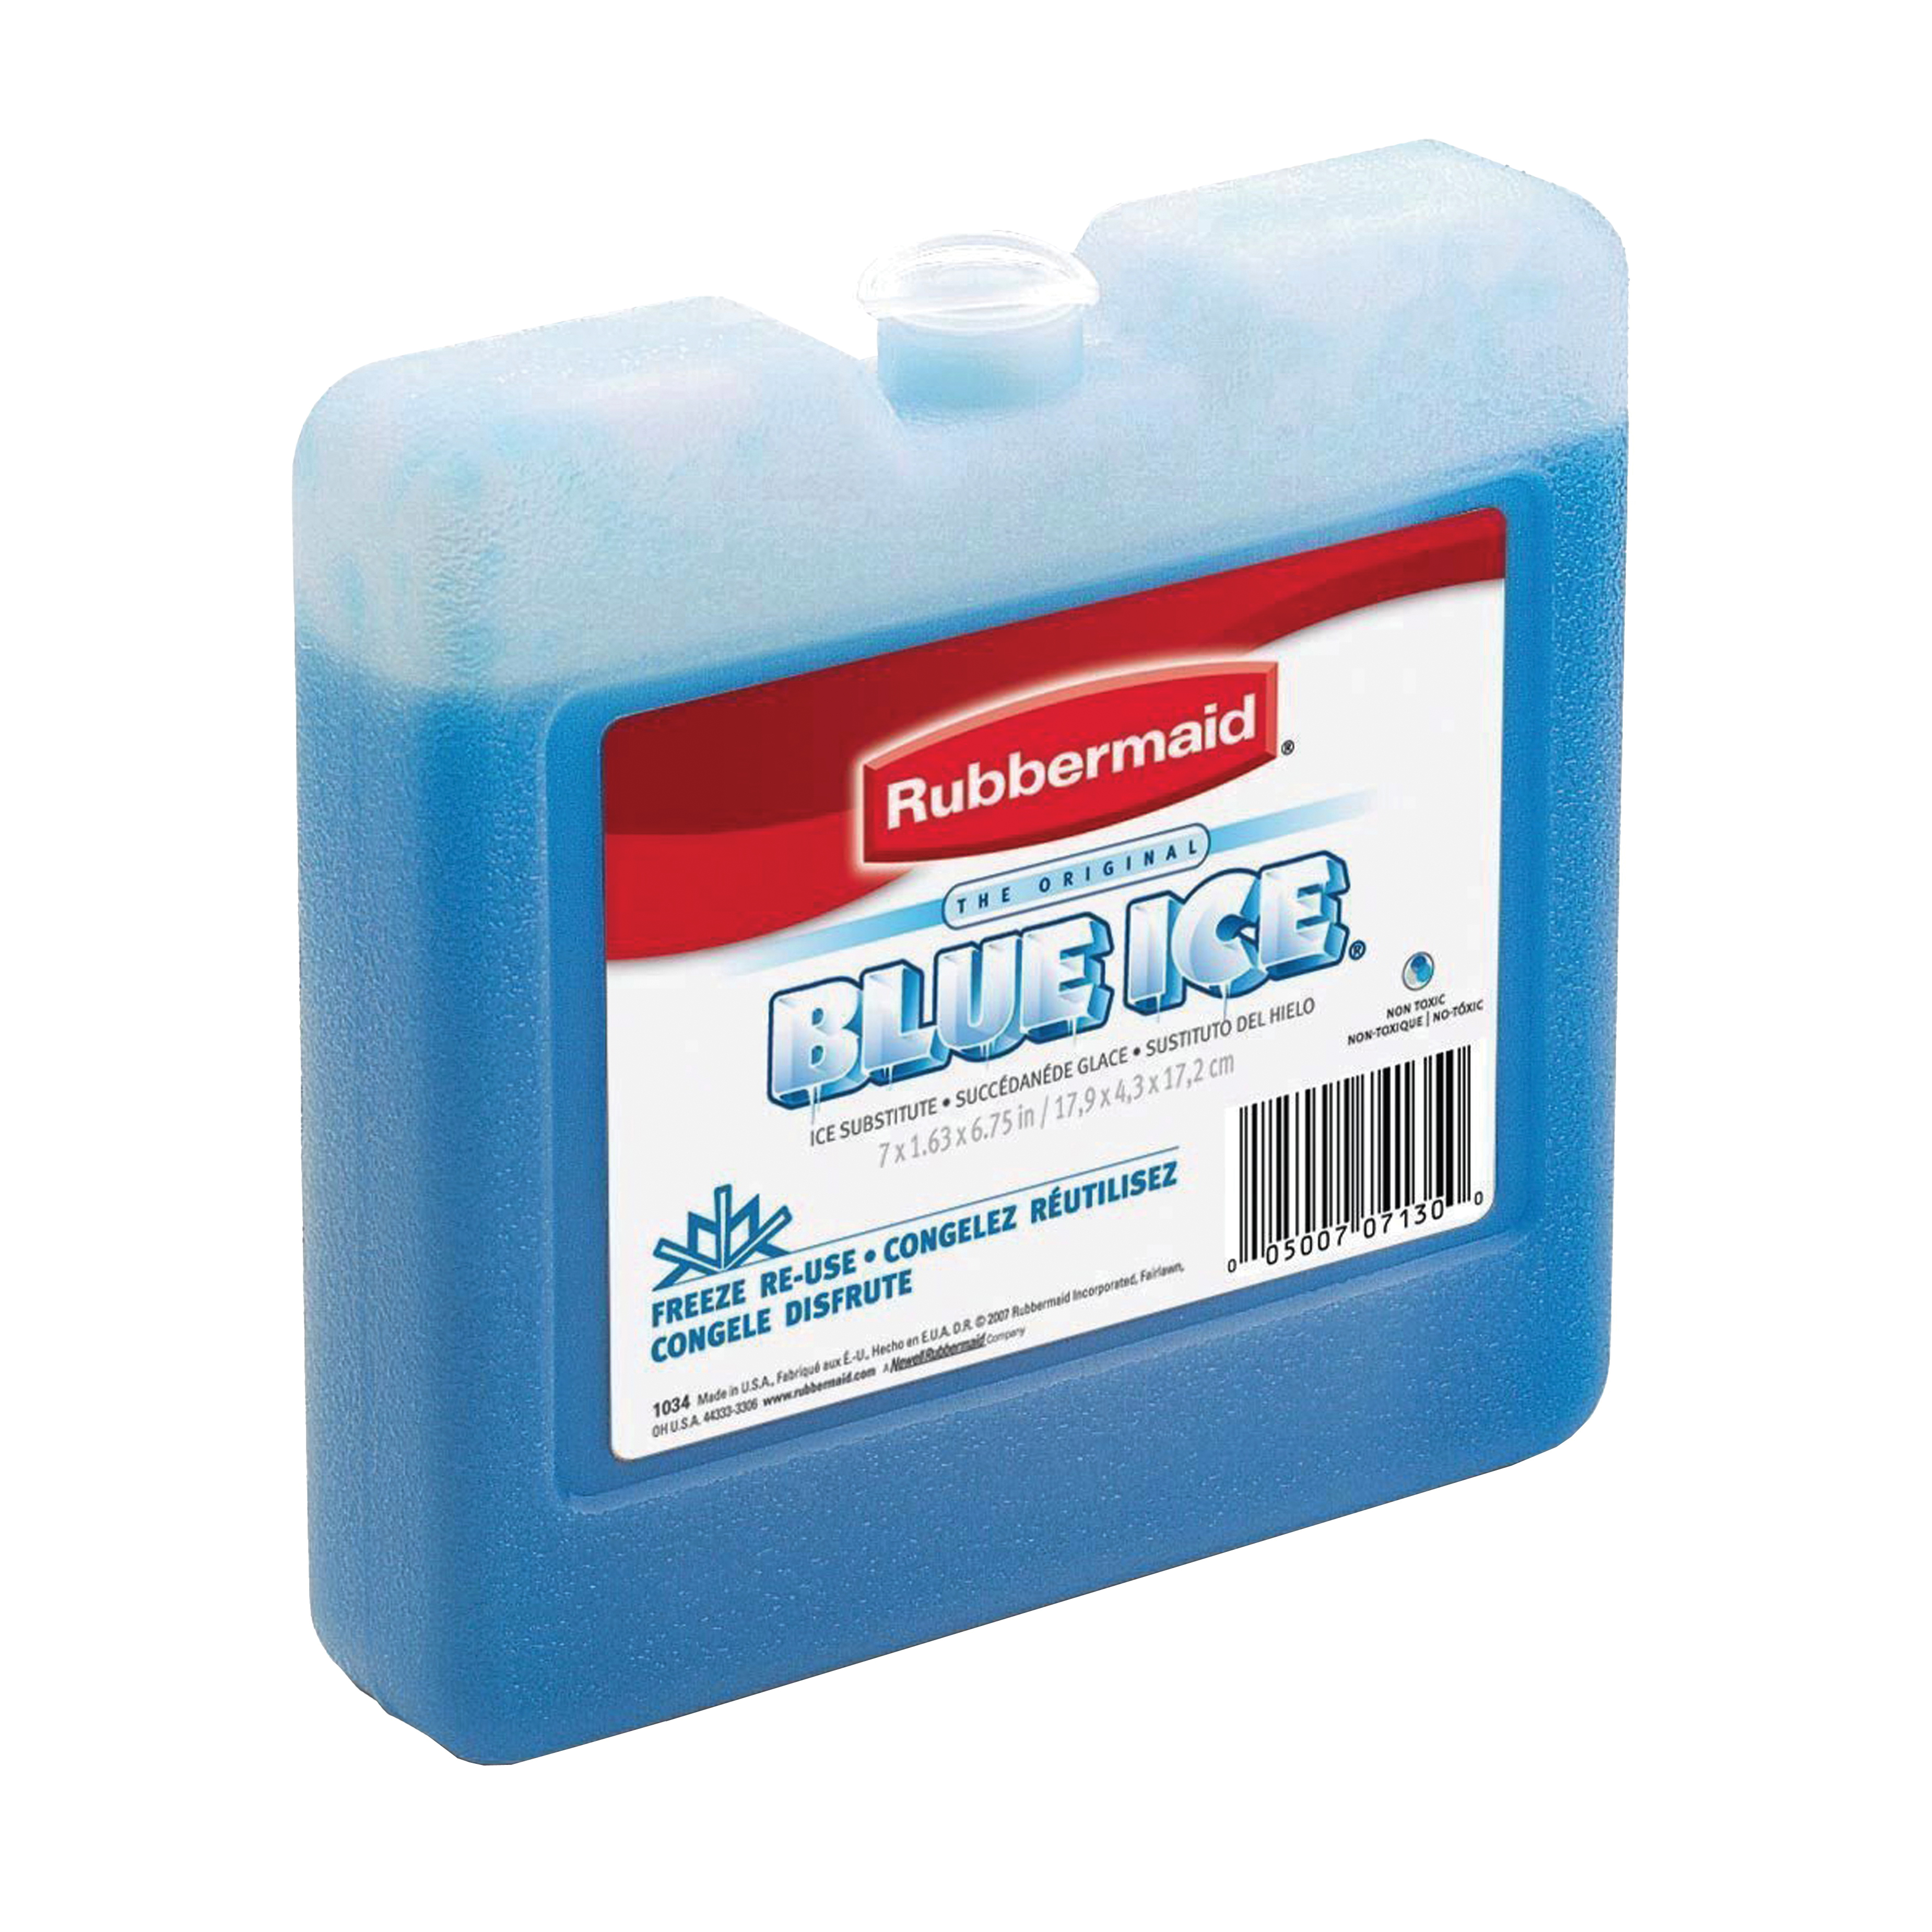 Rubbermaid 1034TL220 Ice Substitute, Blue - 1